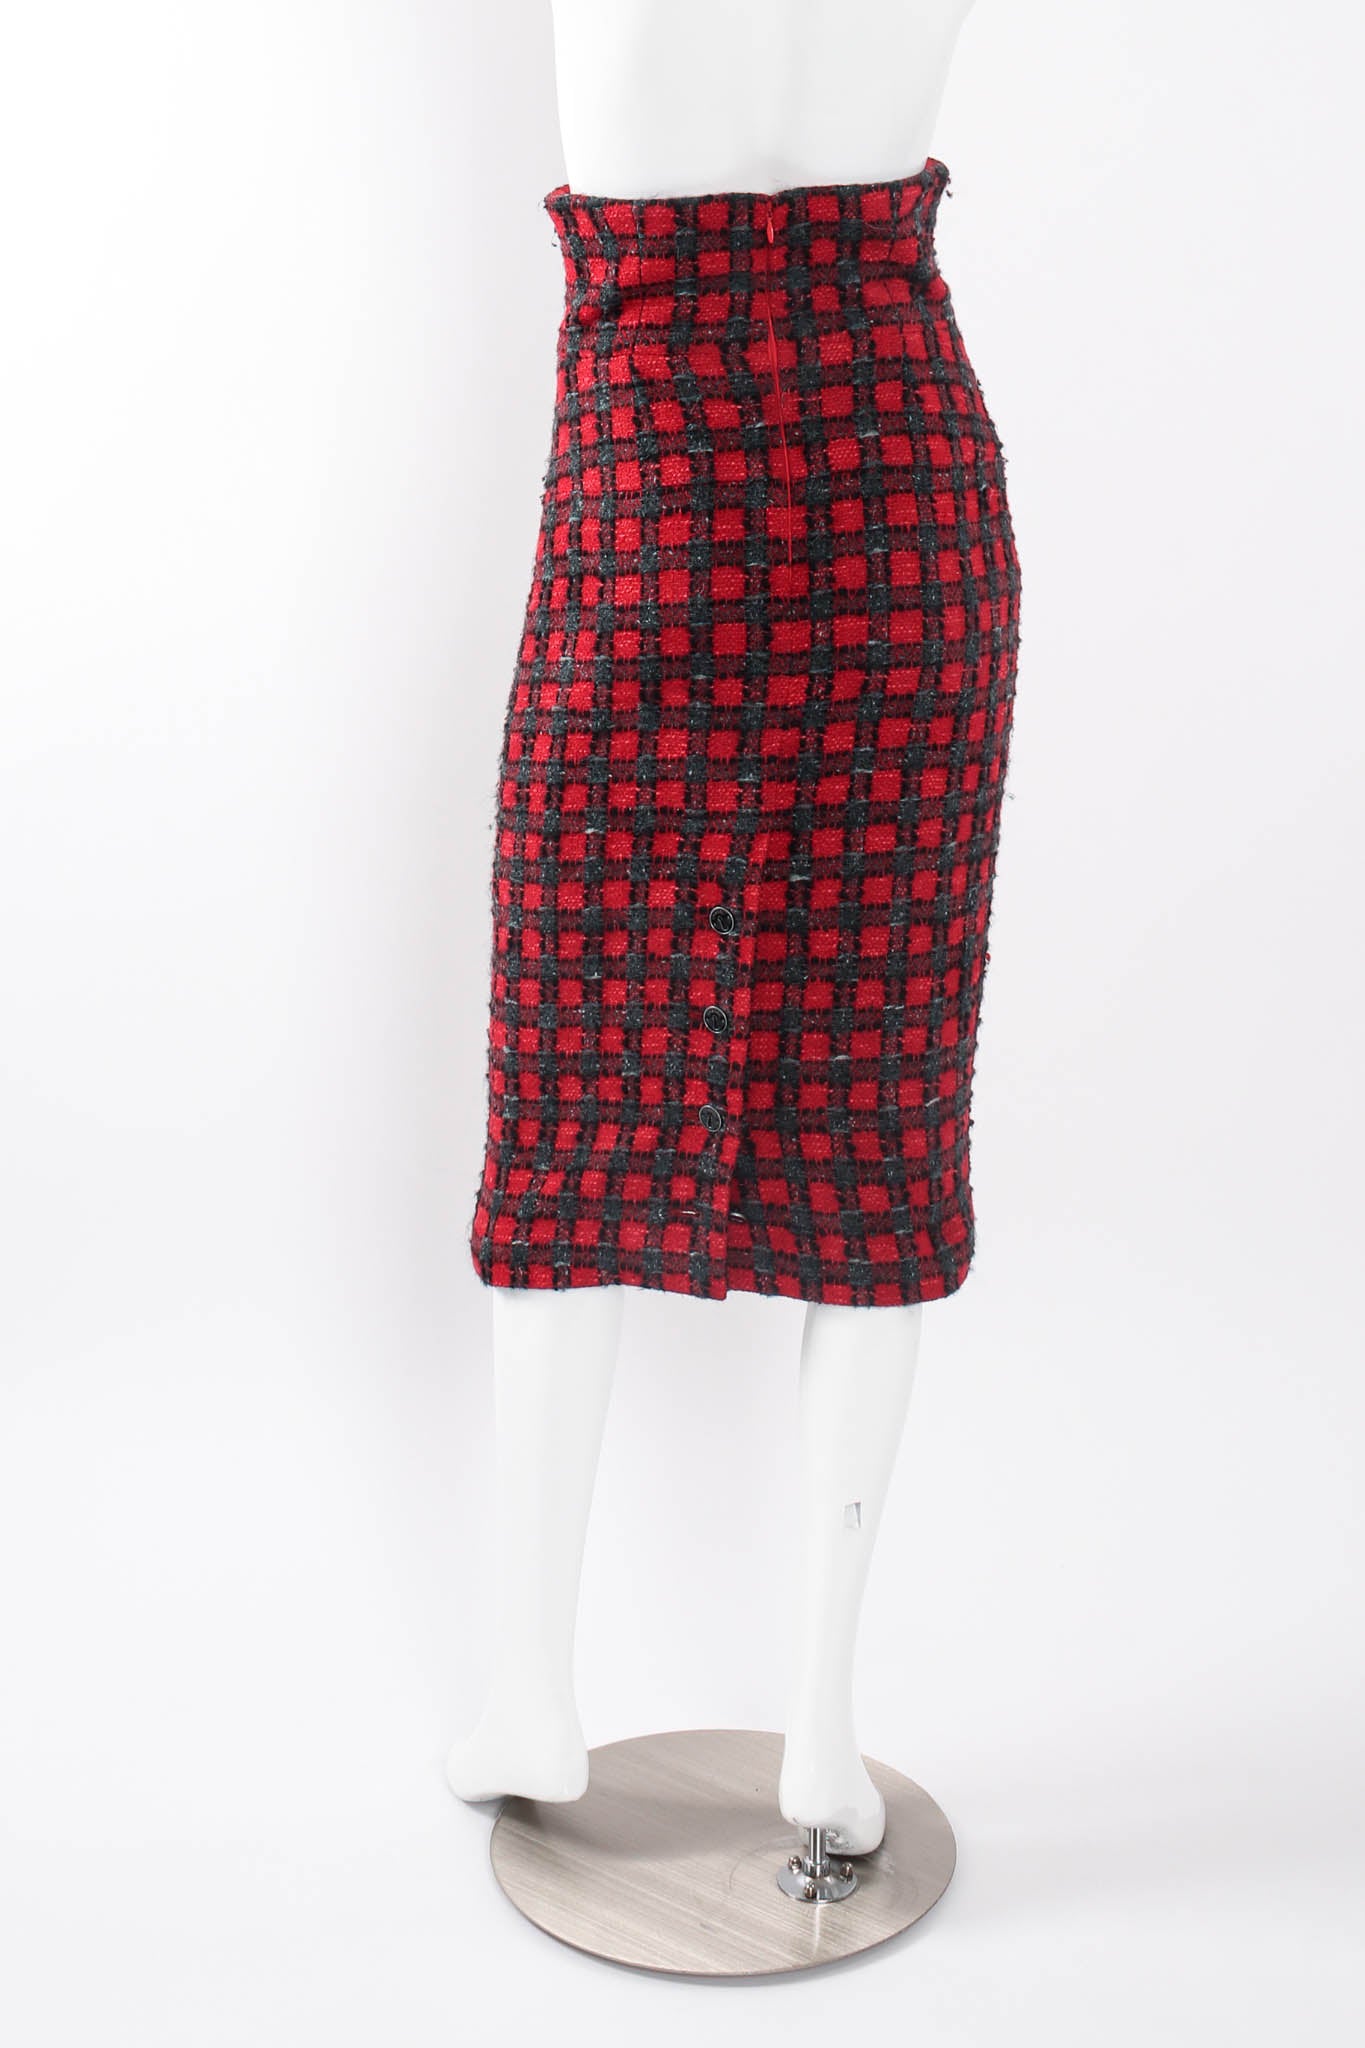 Chanel A/W 2007 High-Waisted Checkered Plaid Skirt back on mannequin at Recess LA